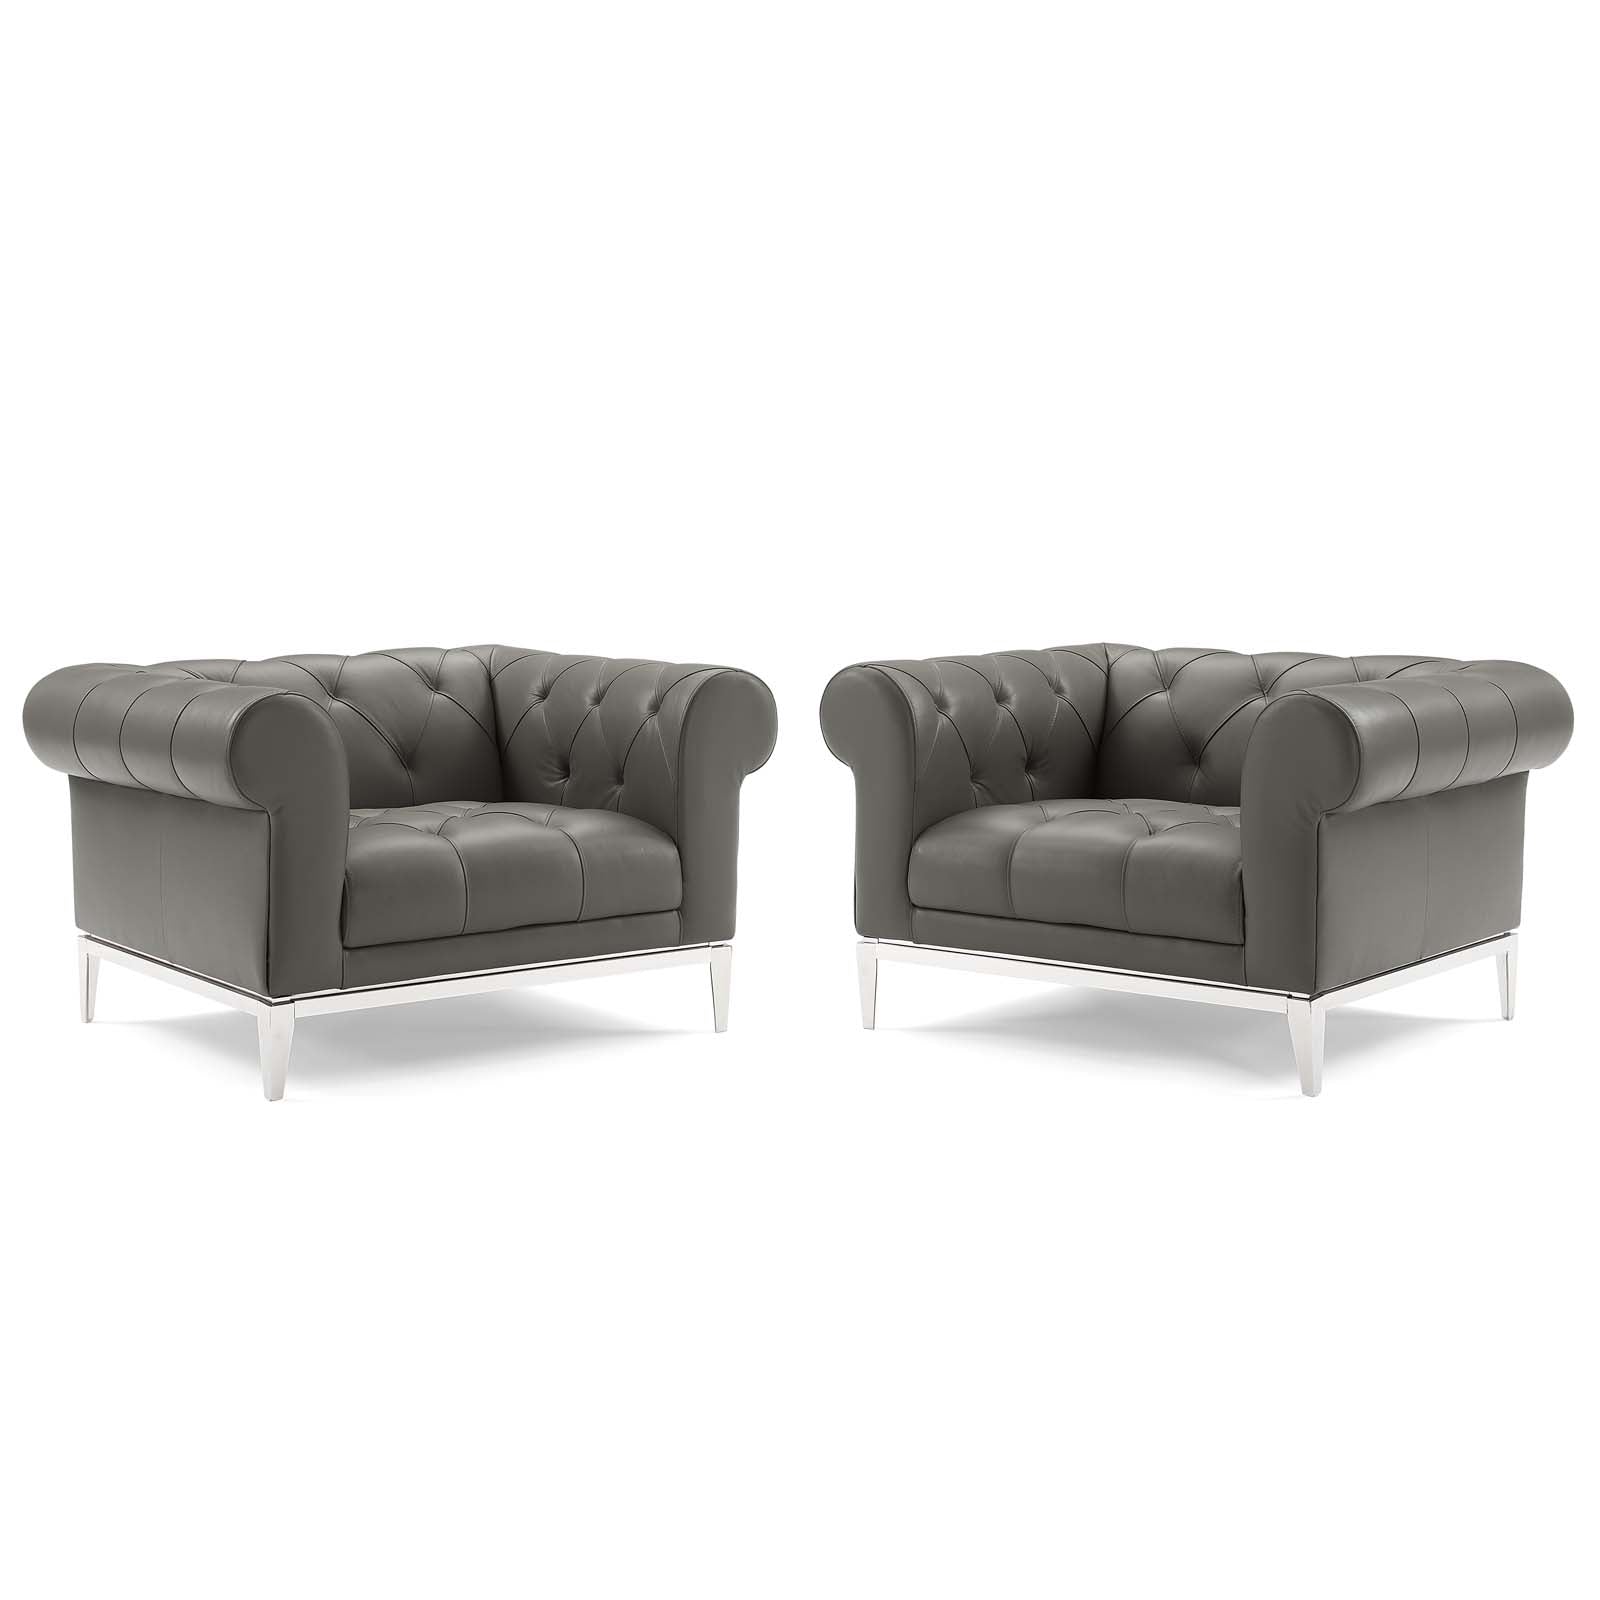 Idyll Tufted Upholstered Leather Armchair Set of 2-Sofa Set-Modway-Wall2Wall Furnishings